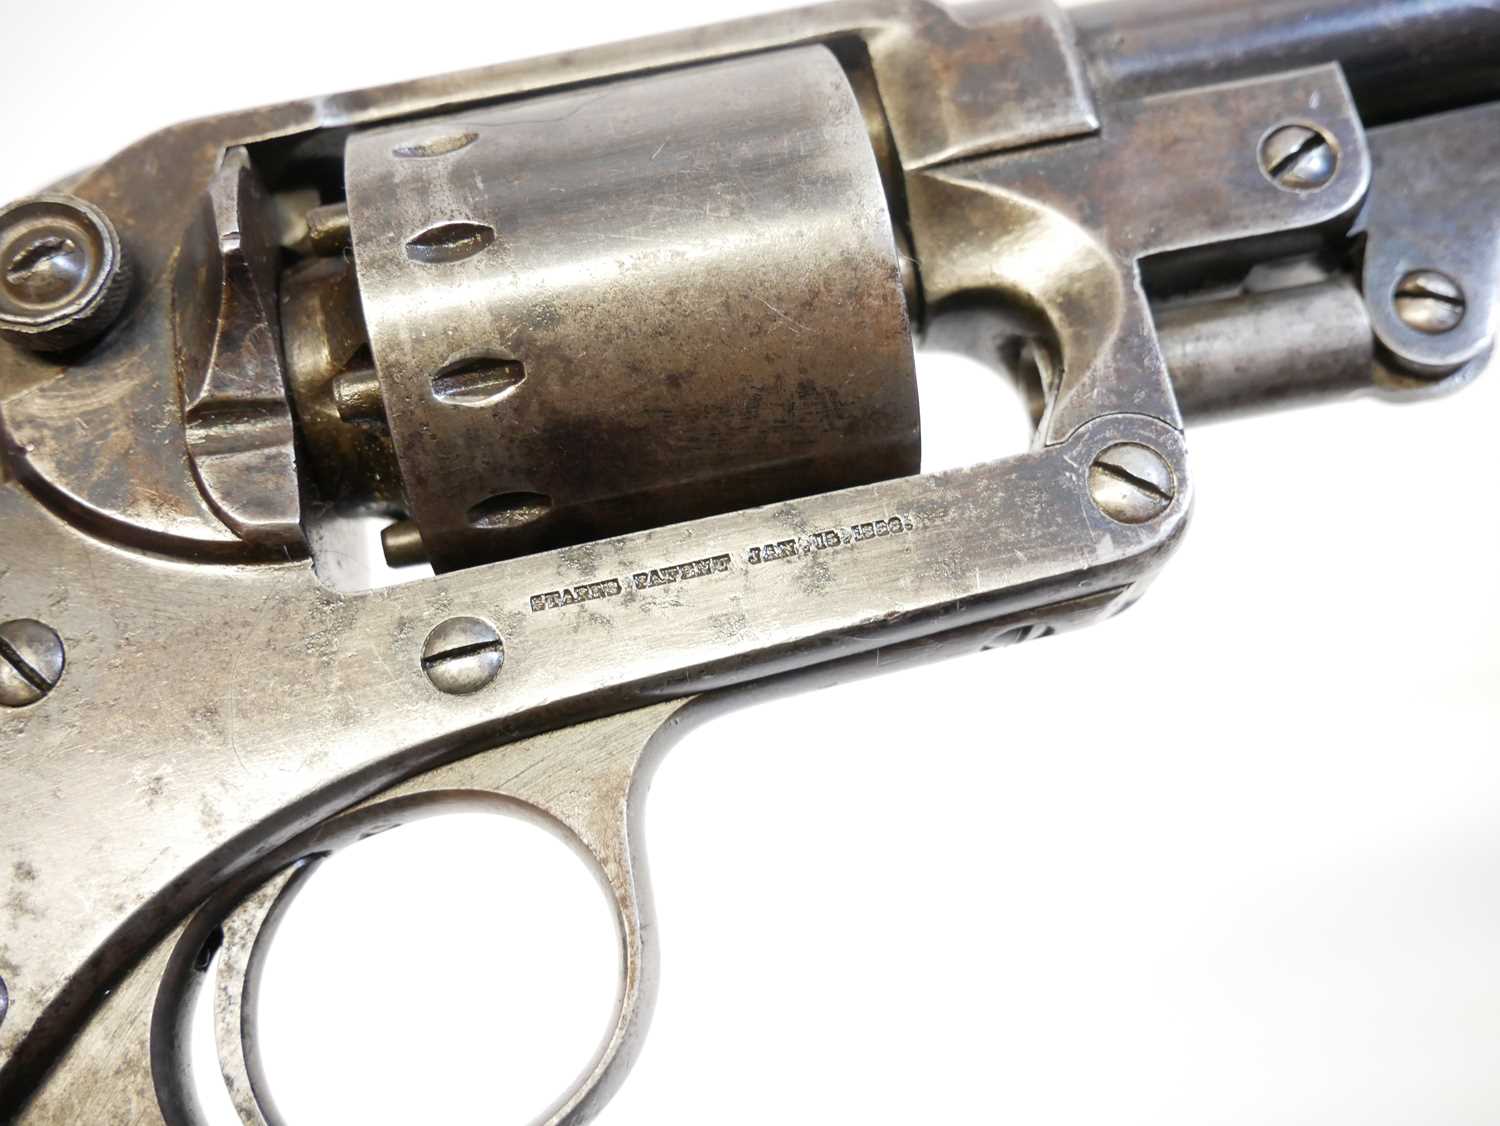 Starr Arms .44 model 1863 percussion single action revolver, serial number 38484 to cylinder only - Image 11 of 13